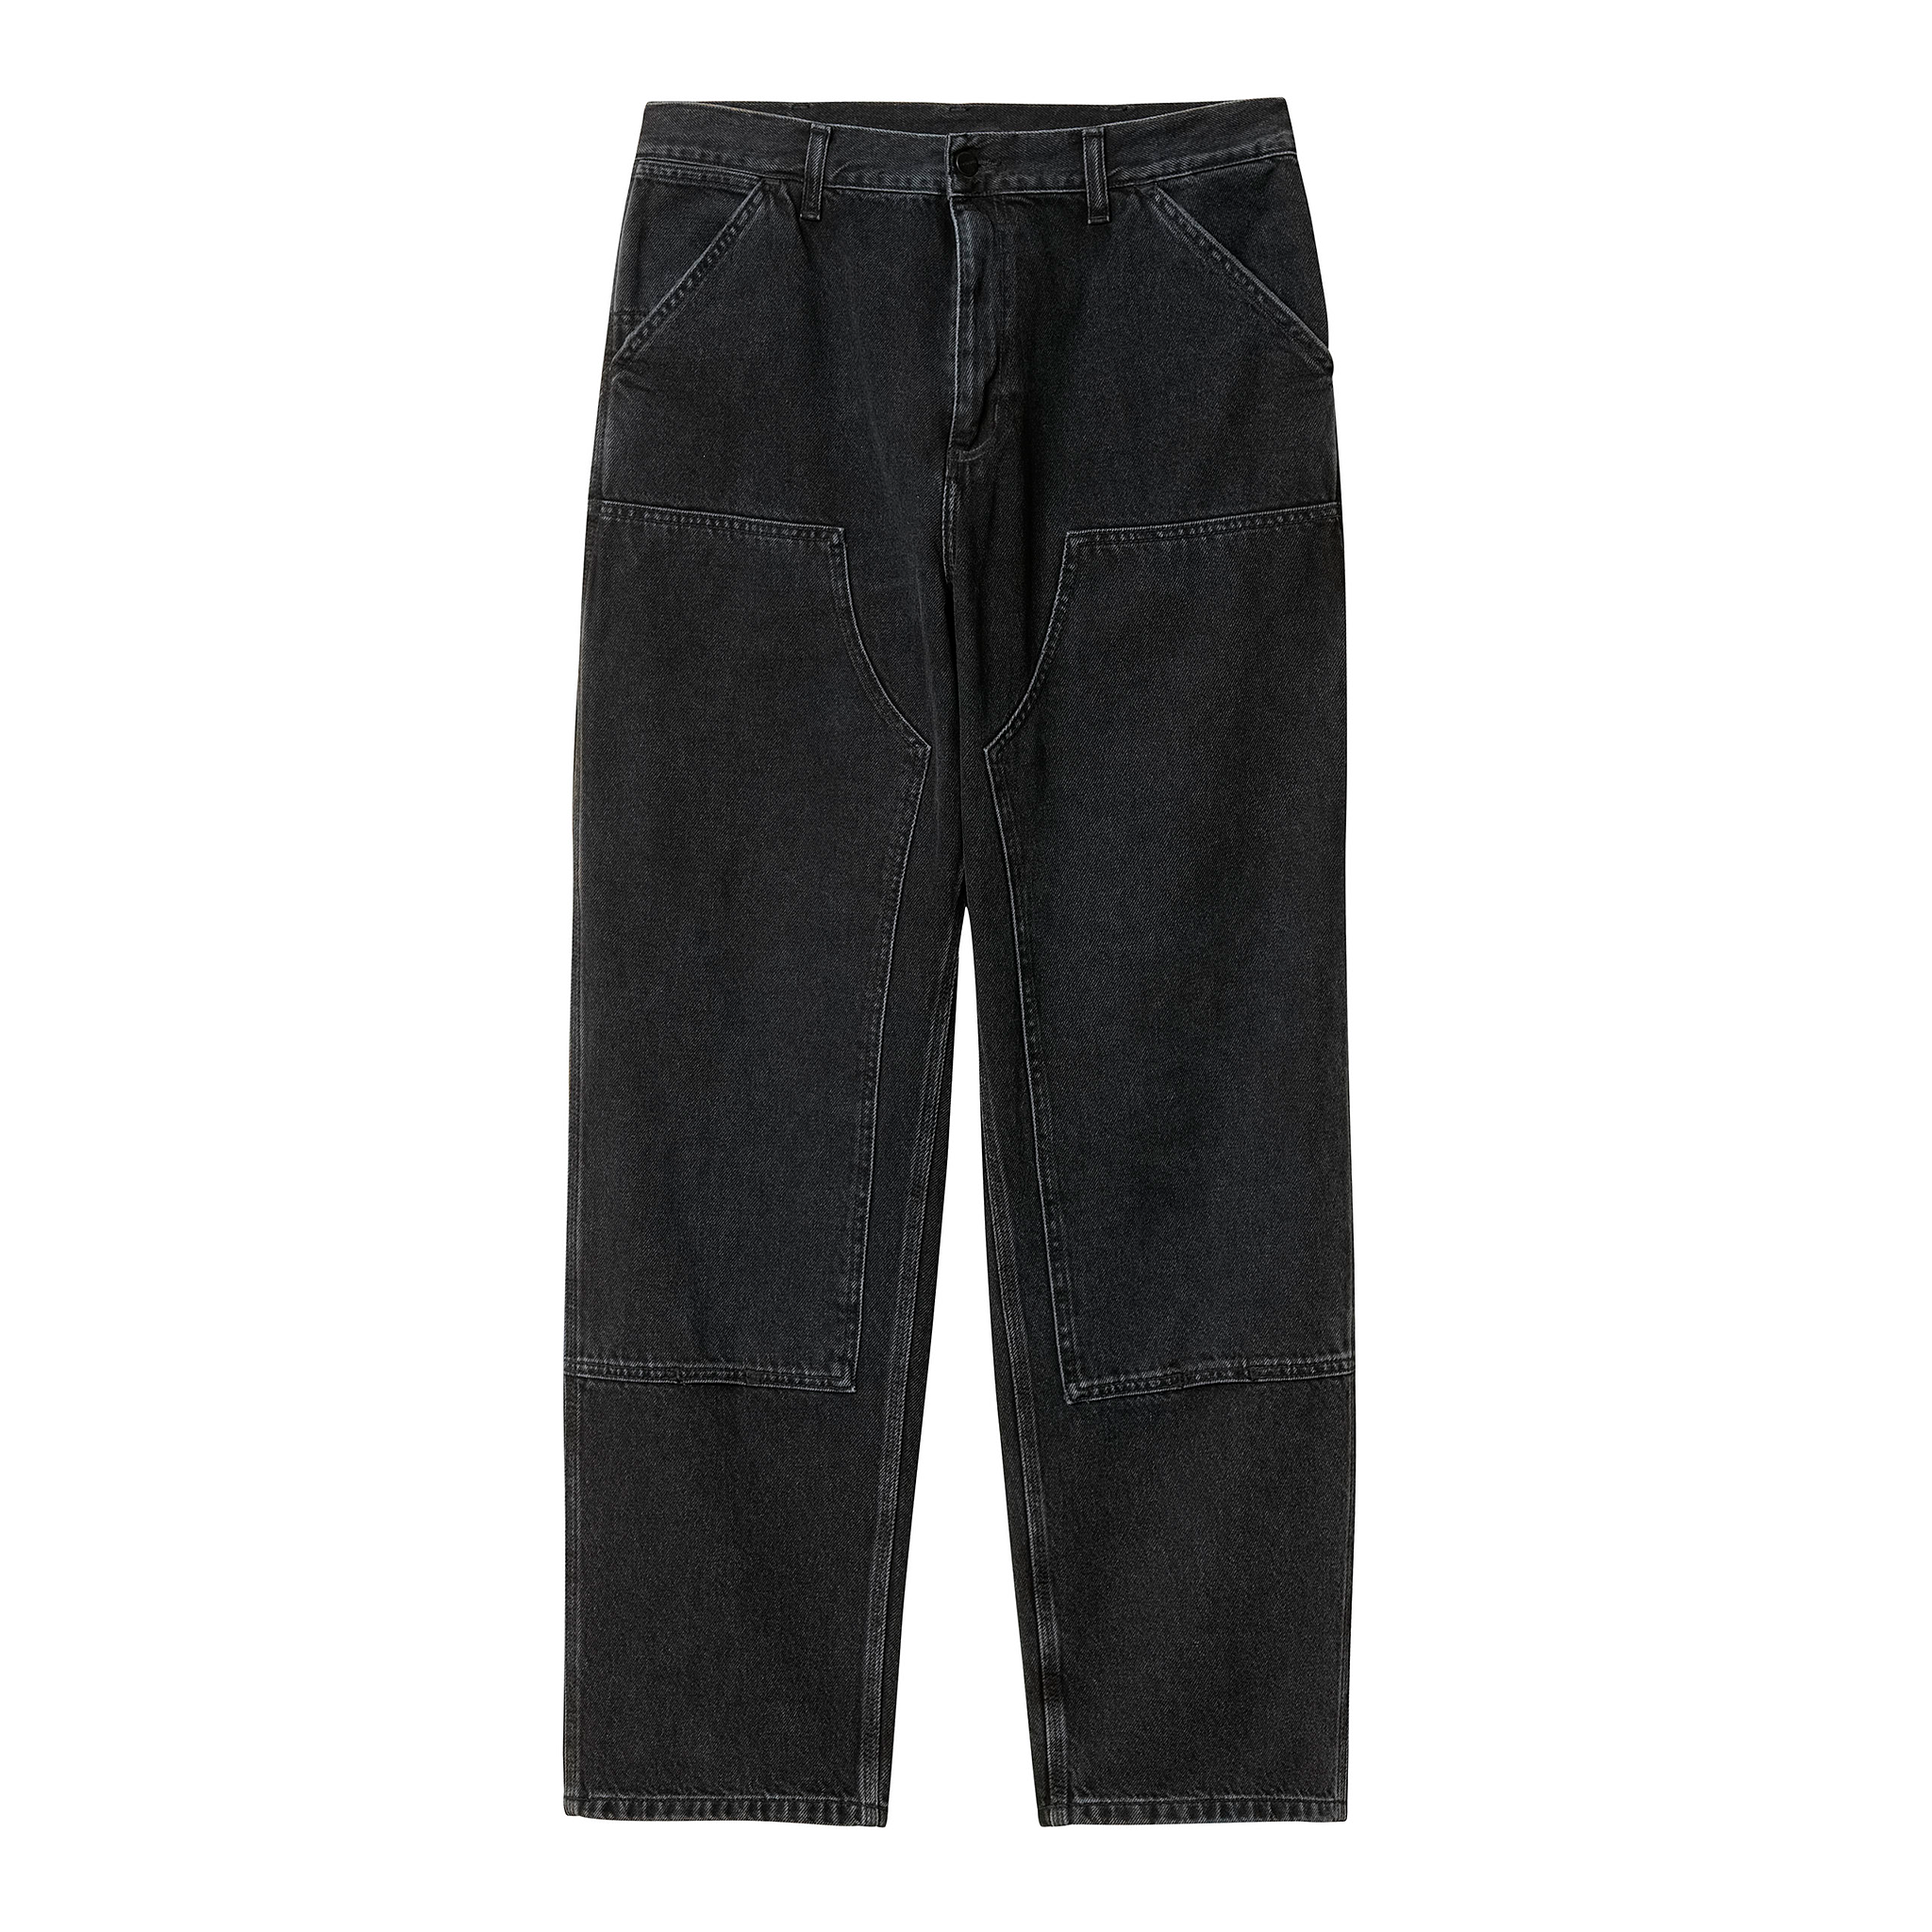 CARHARTT WIP - DOUBLE KNEE PANT BLACK STONE WASHED